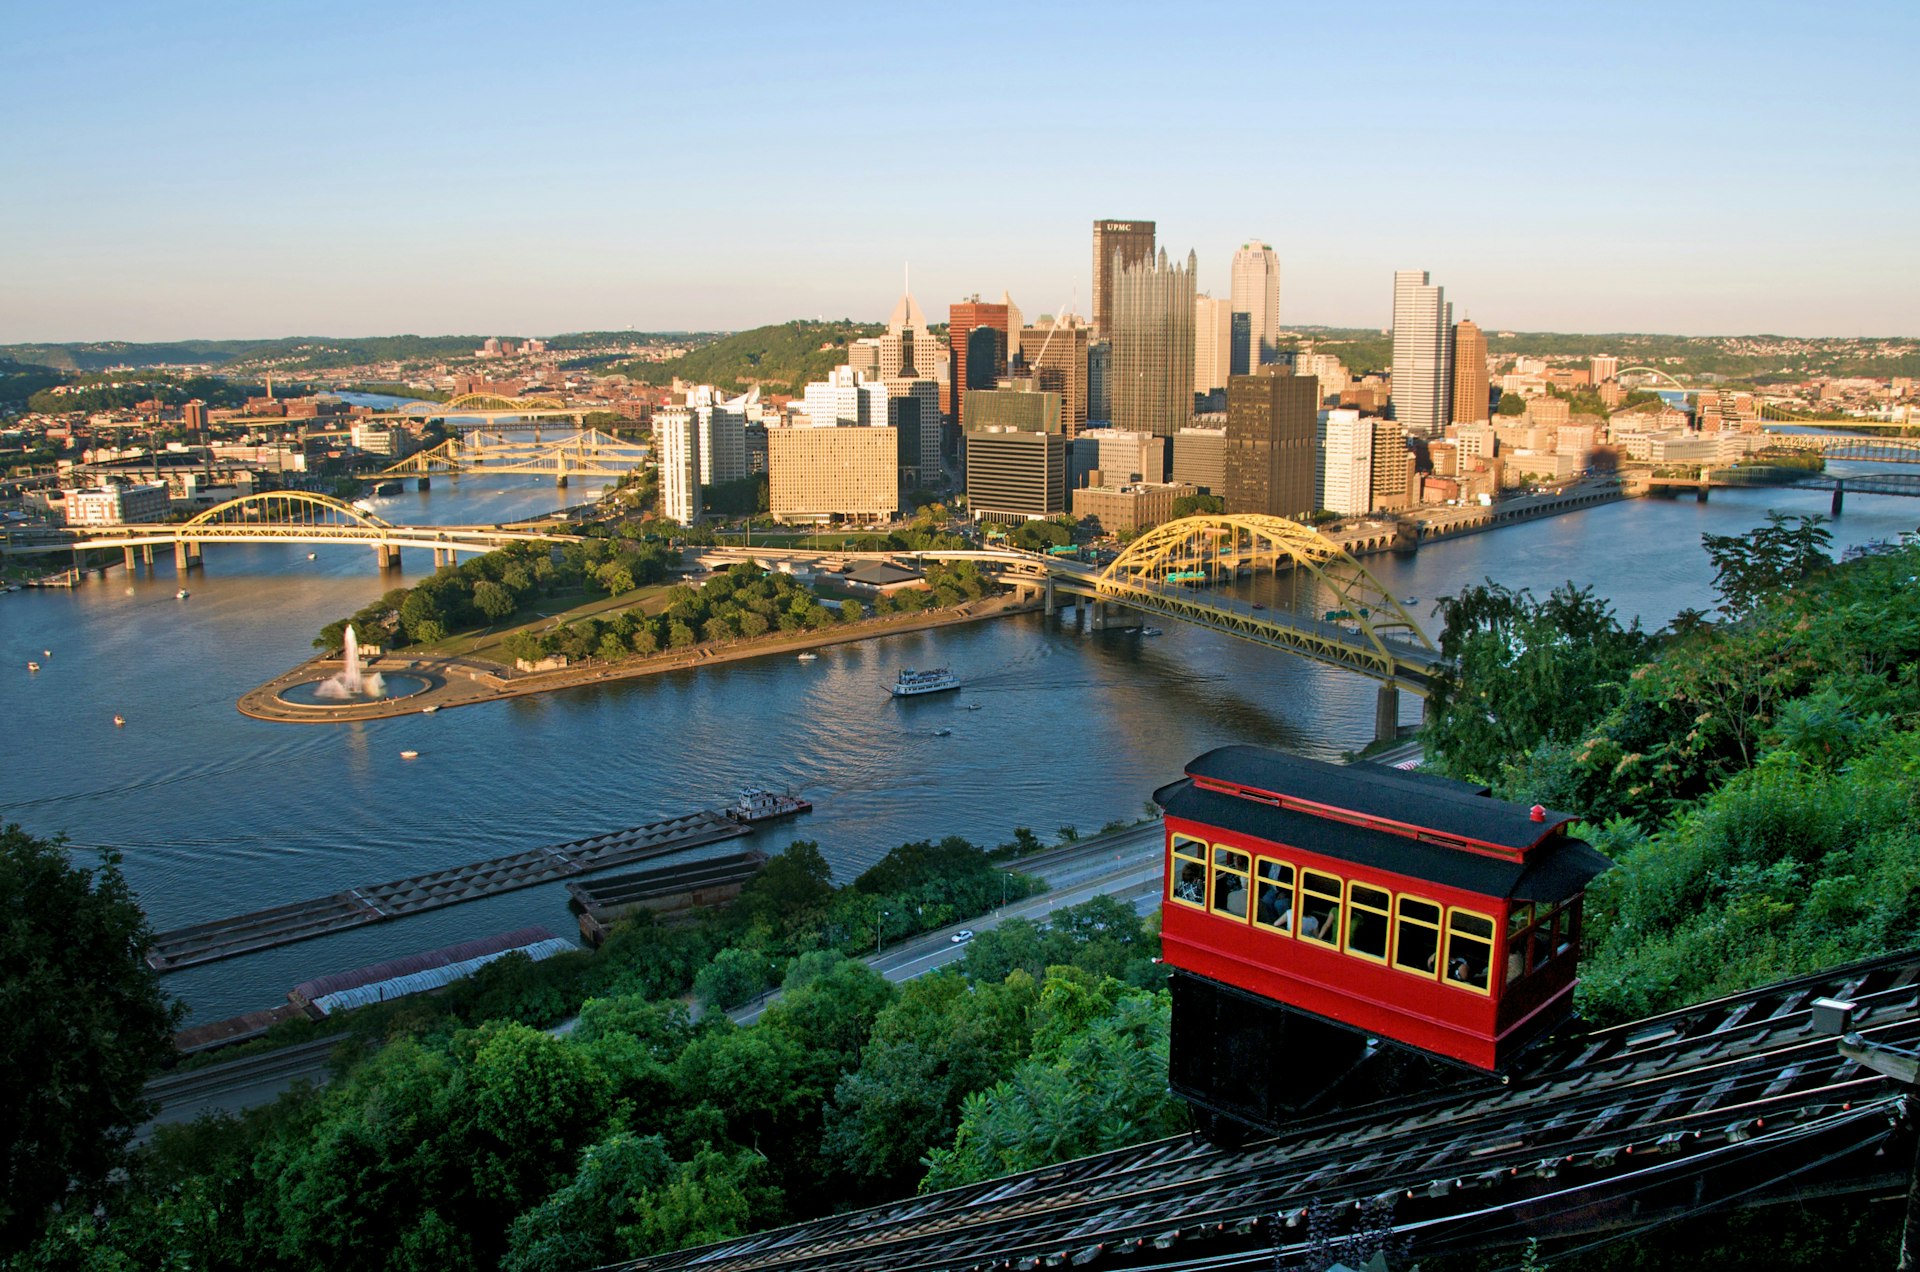 In the foreground, a red funicular is climbing up a hillside. Beyond, there is a wide river which is spanned by many bridges, and beyond those is a skyline of skyscrapers.